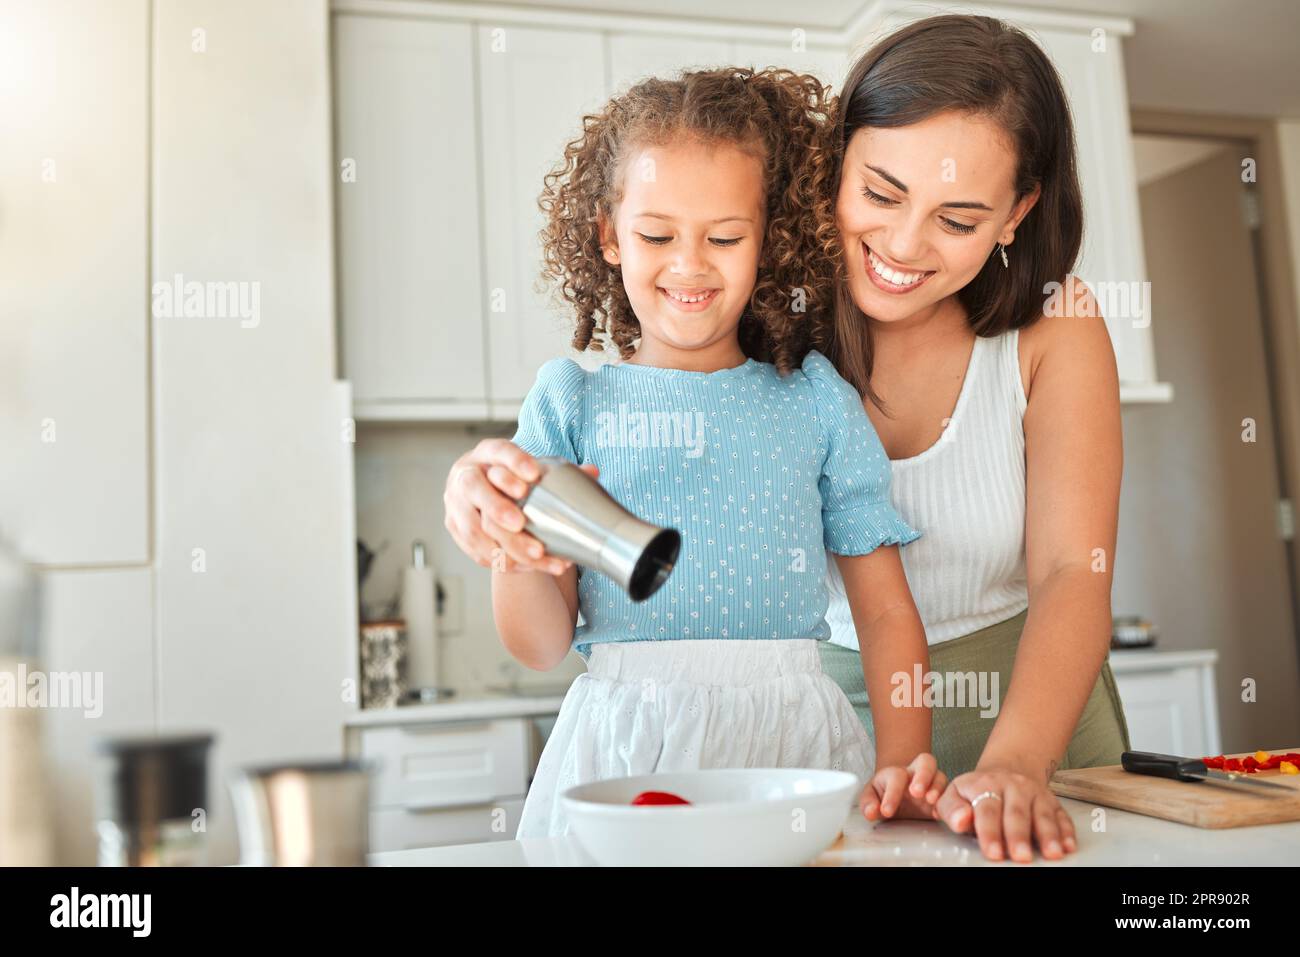 Happy mother teaching little daughter to cook in kitchen at home. Little girl adding seasoning to a bowl while making a salad with mom Stock Photo